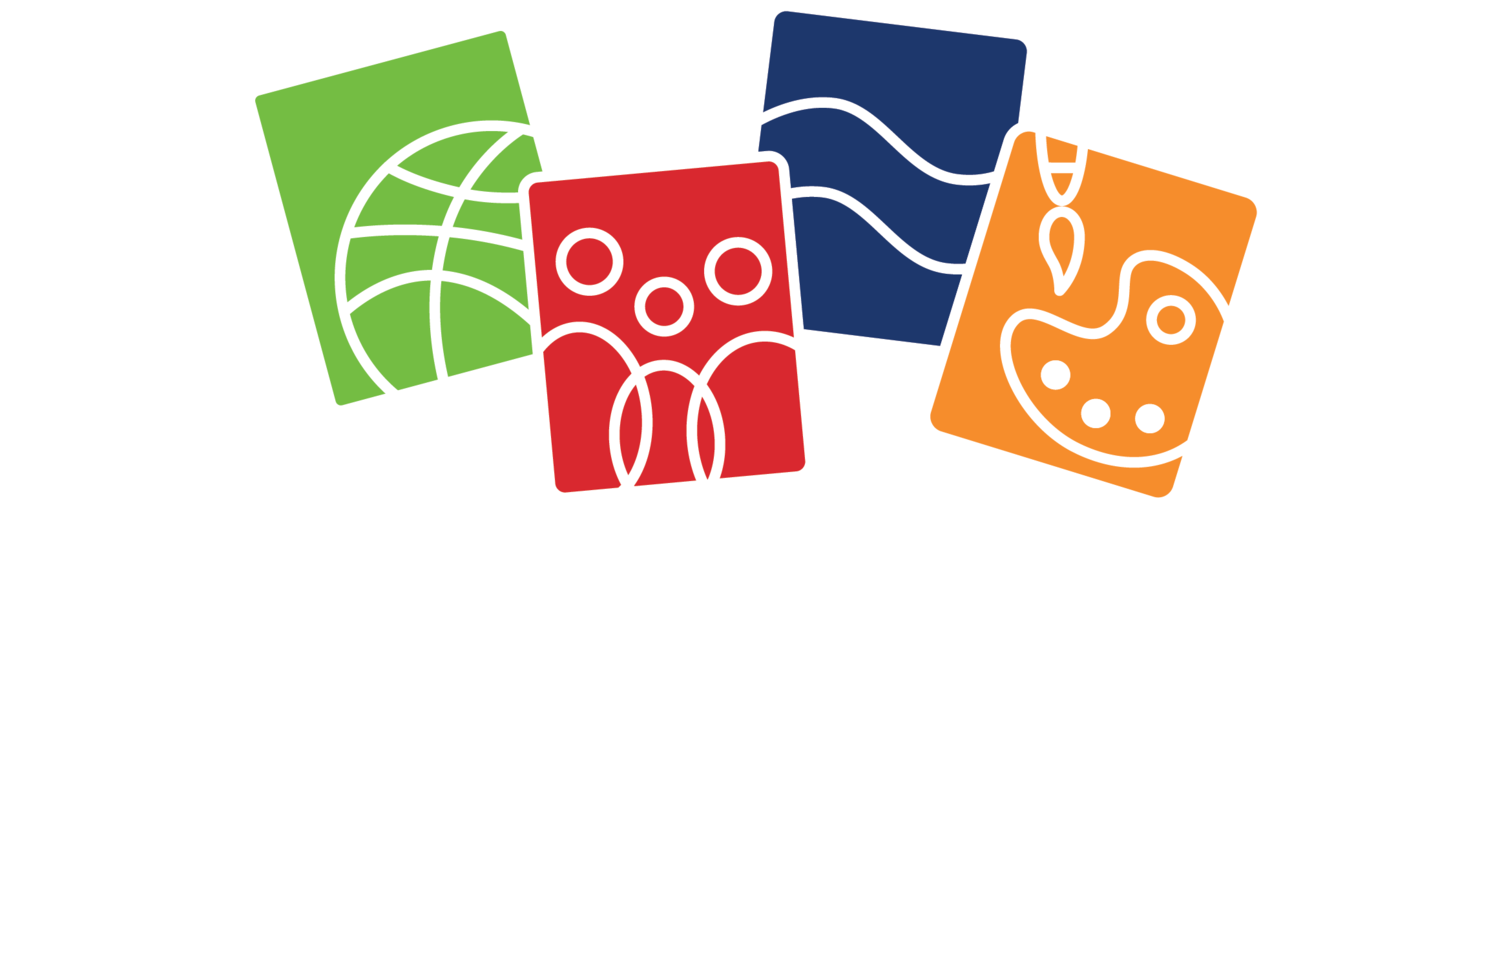 Port Coquitlam - Youth Services